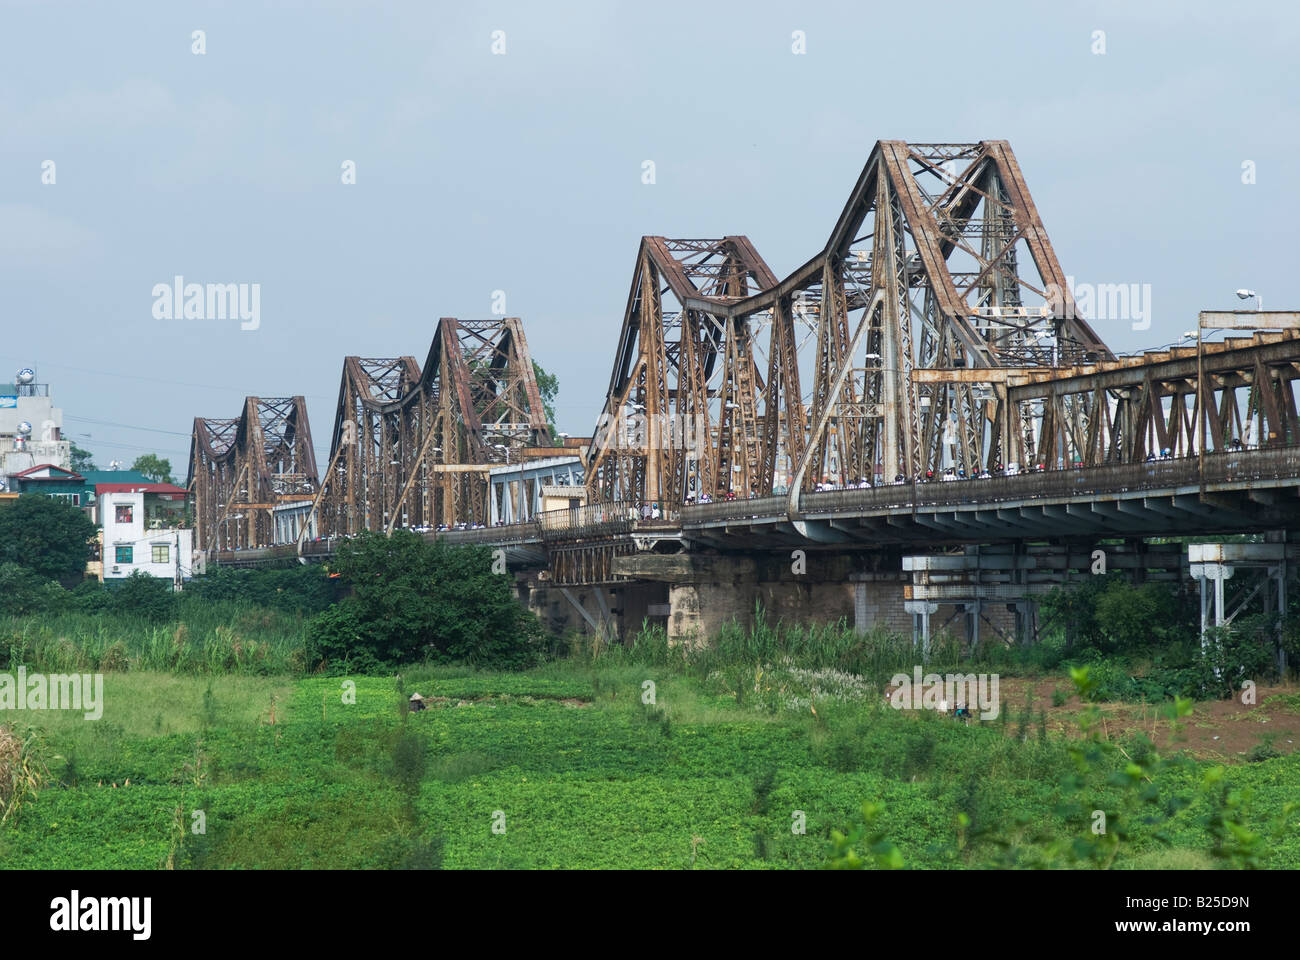 The Long Bien railway bridge crossing the Red River in Hanoi seen from the island in the river Stock Photo